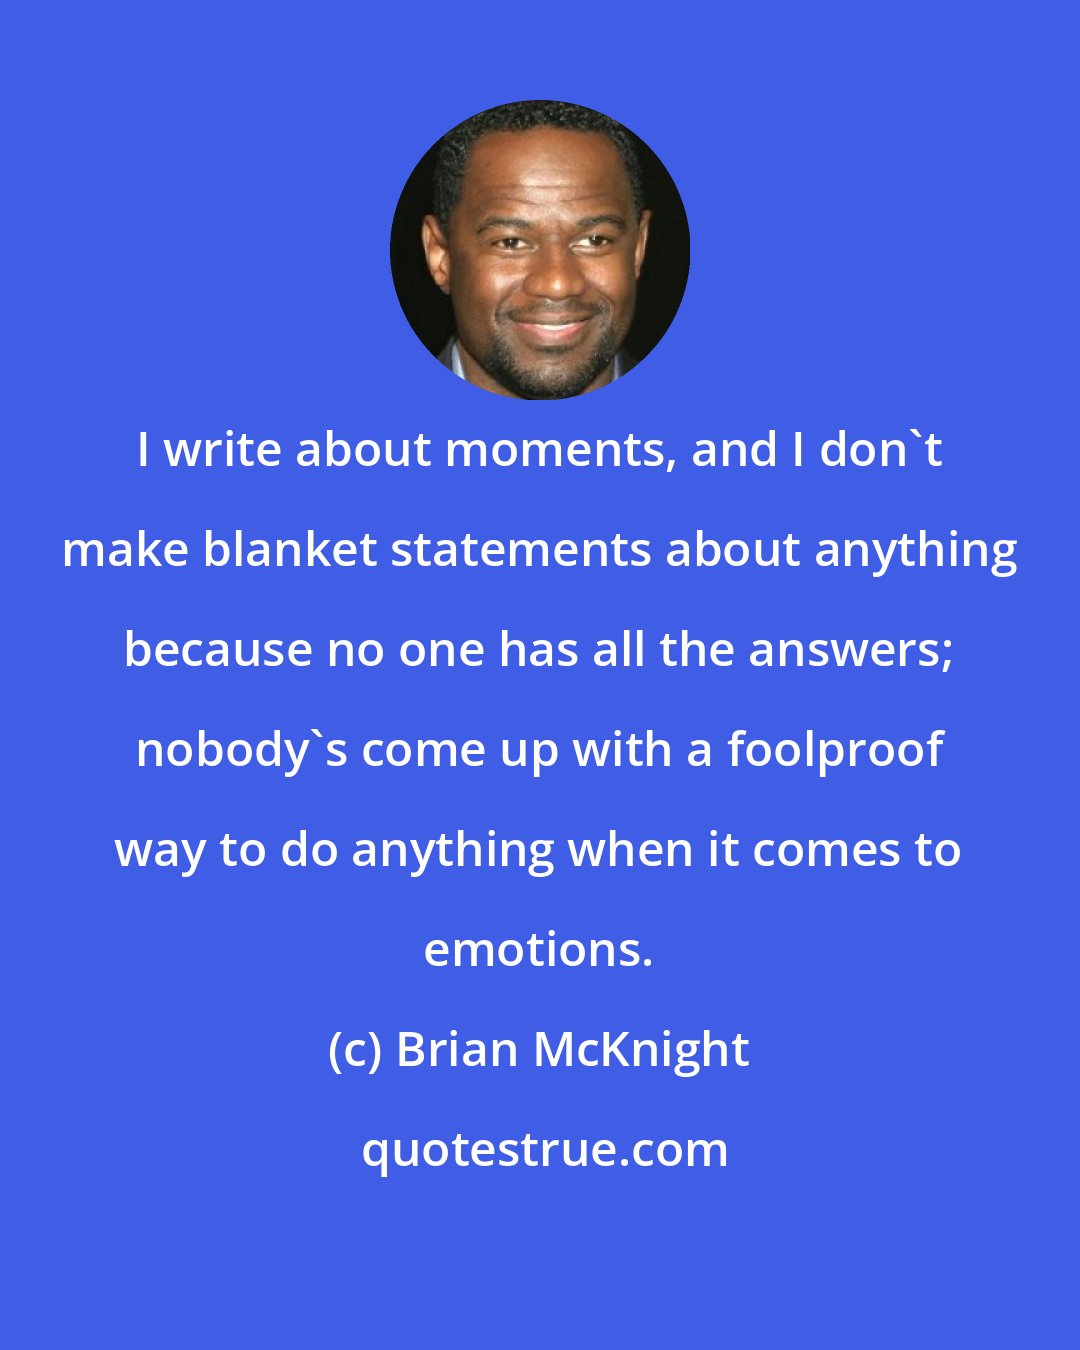 Brian McKnight: I write about moments, and I don't make blanket statements about anything because no one has all the answers; nobody's come up with a foolproof way to do anything when it comes to emotions.